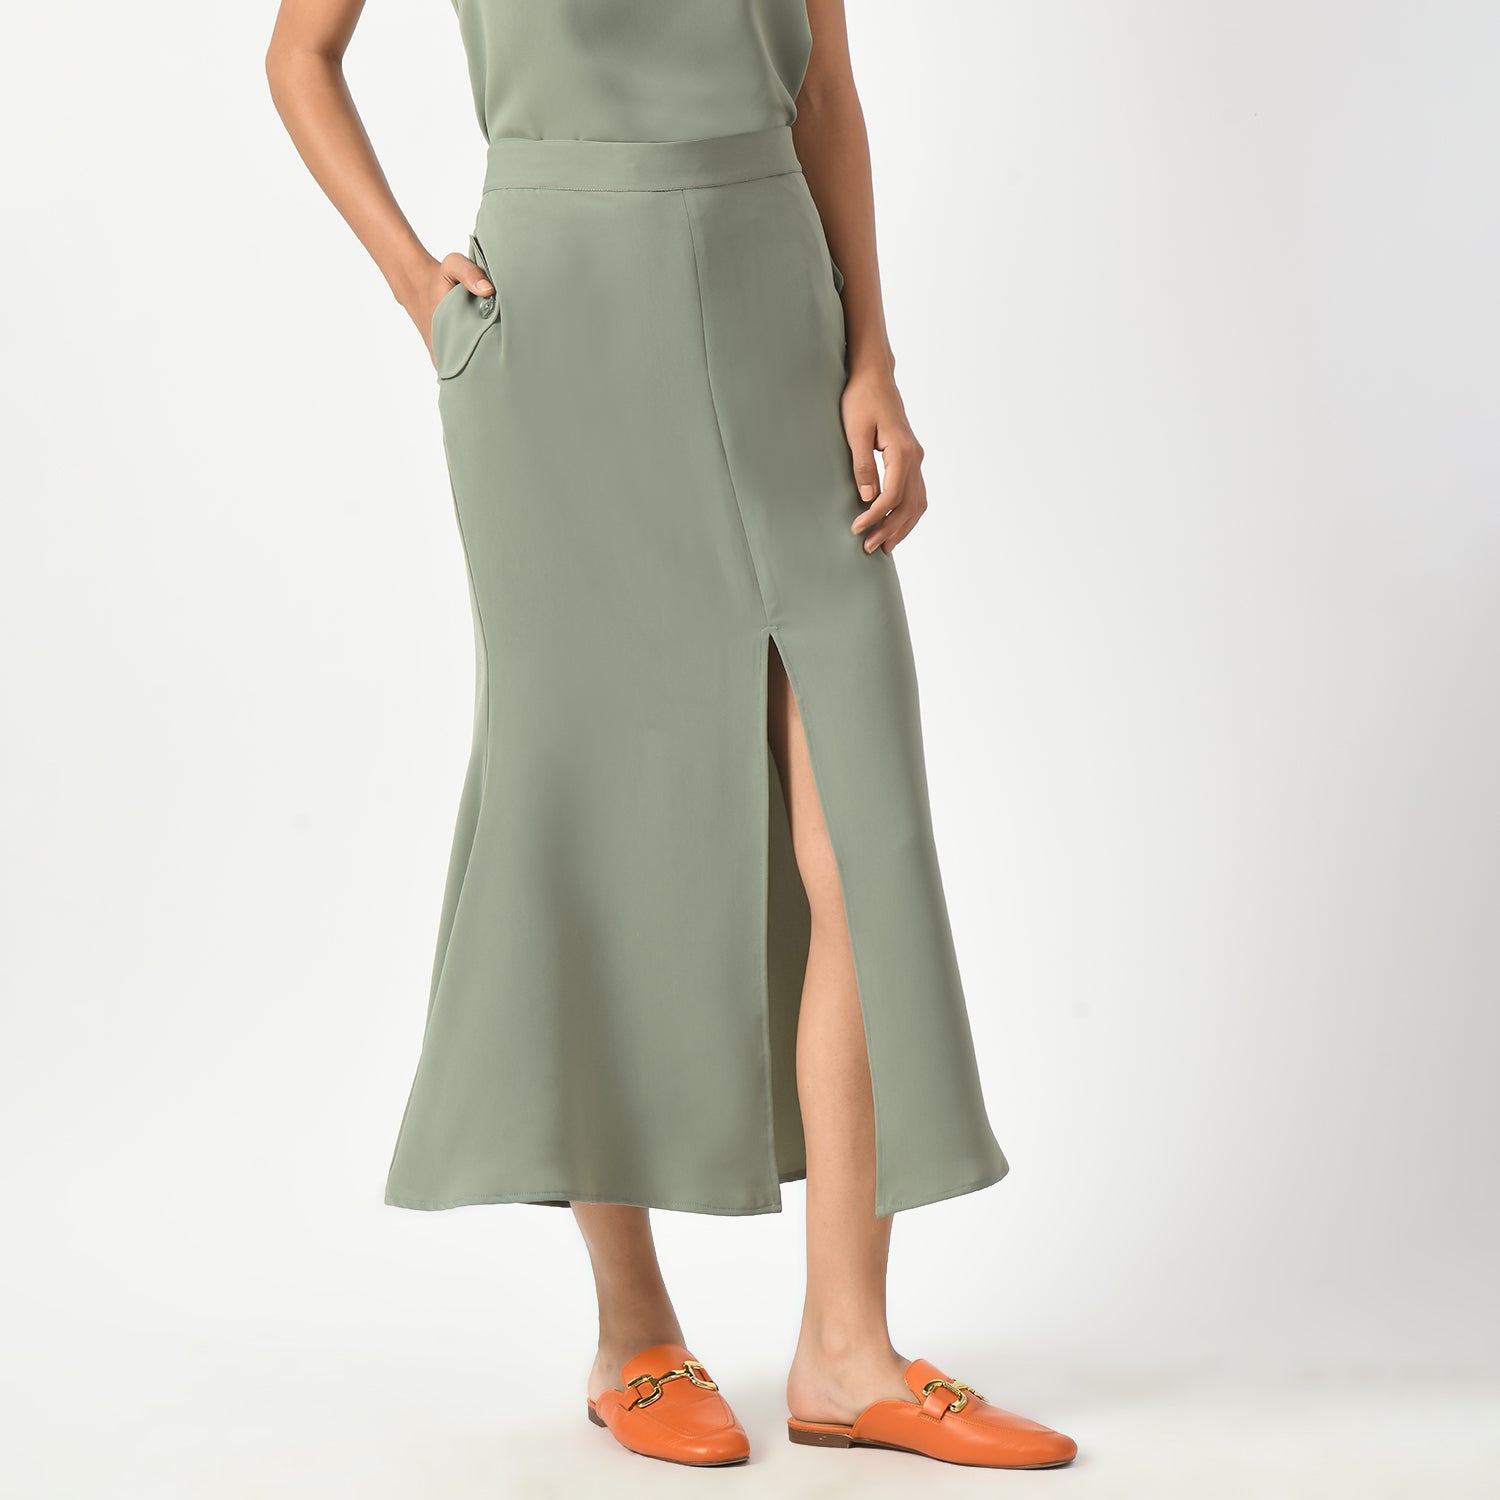 Dusty Green Fish Cut Skirt With Front Slit